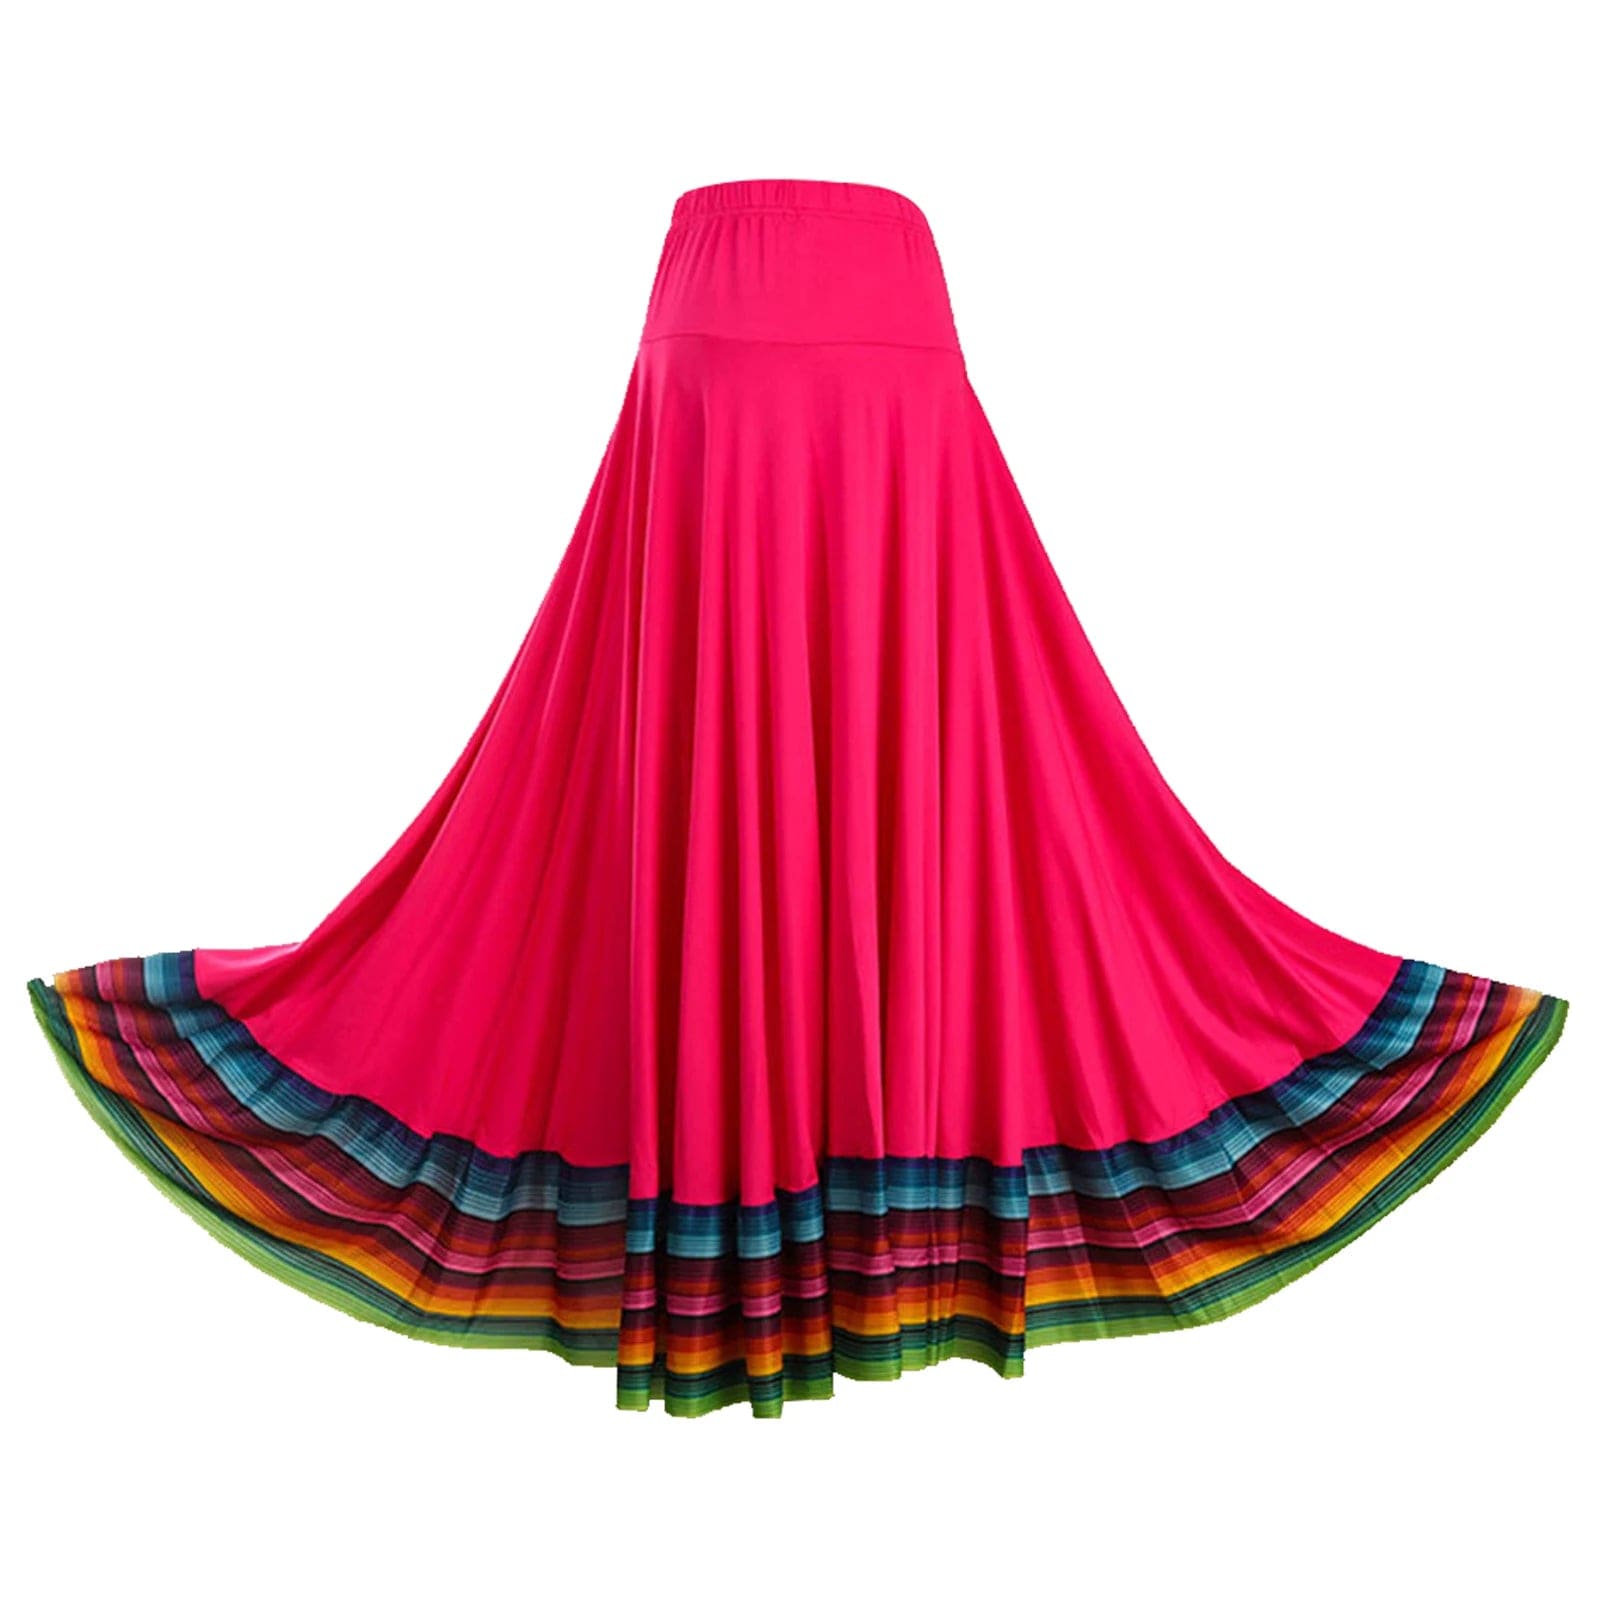 Mexican dancing skirts